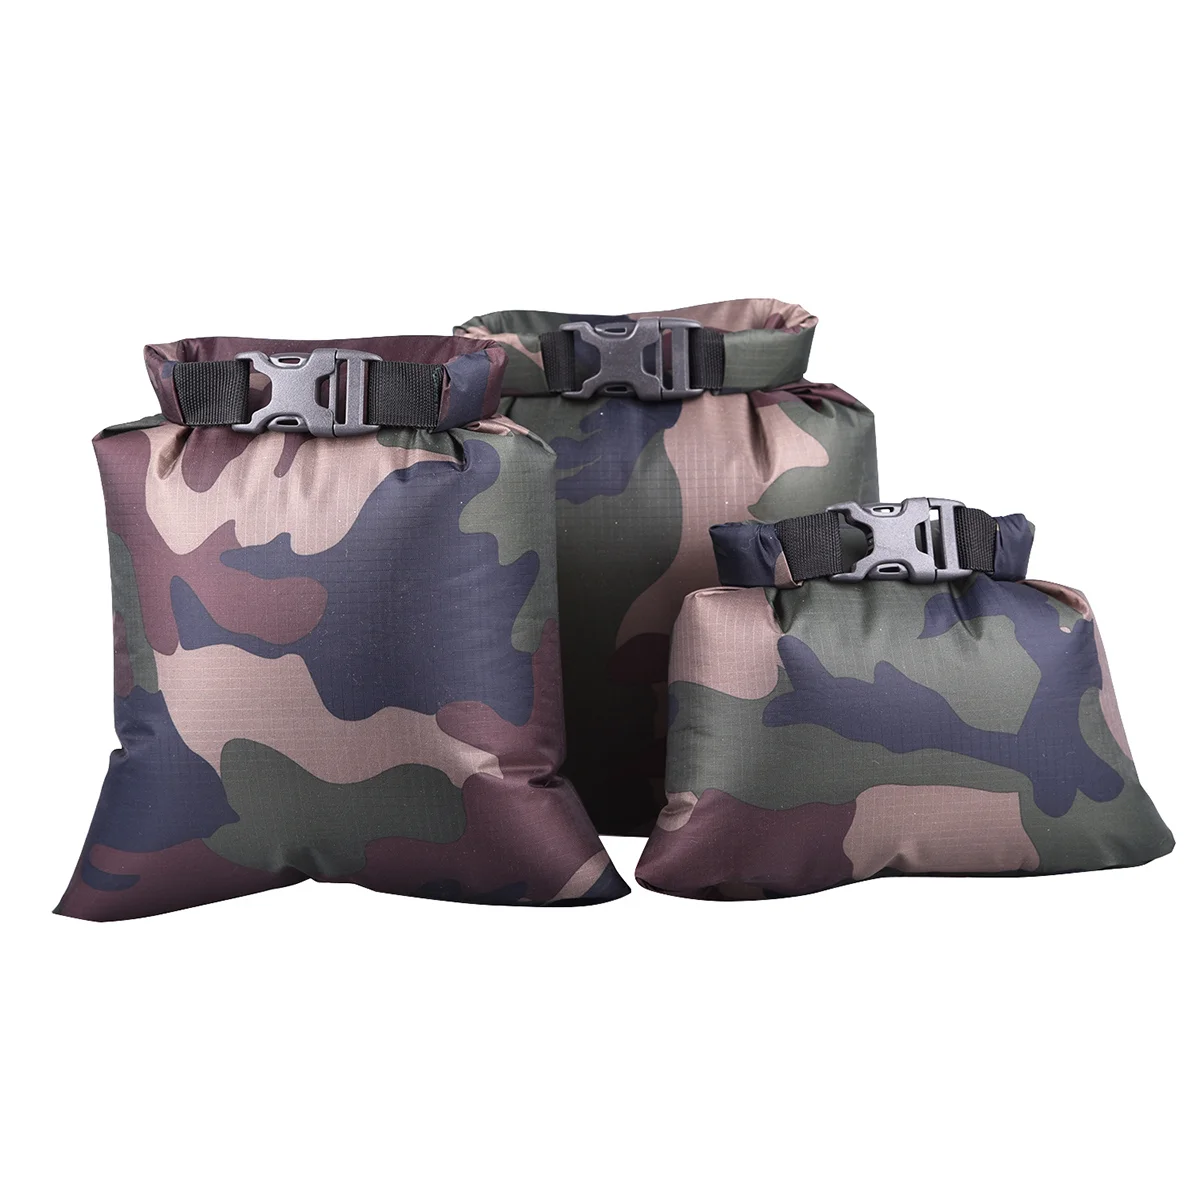 

3pcs 15L+25L+35L Waterproof Dry Bag Storage Pouch Bag for Camping Boating Kayaking Rafting Fishing (Camouflage£© Equipment